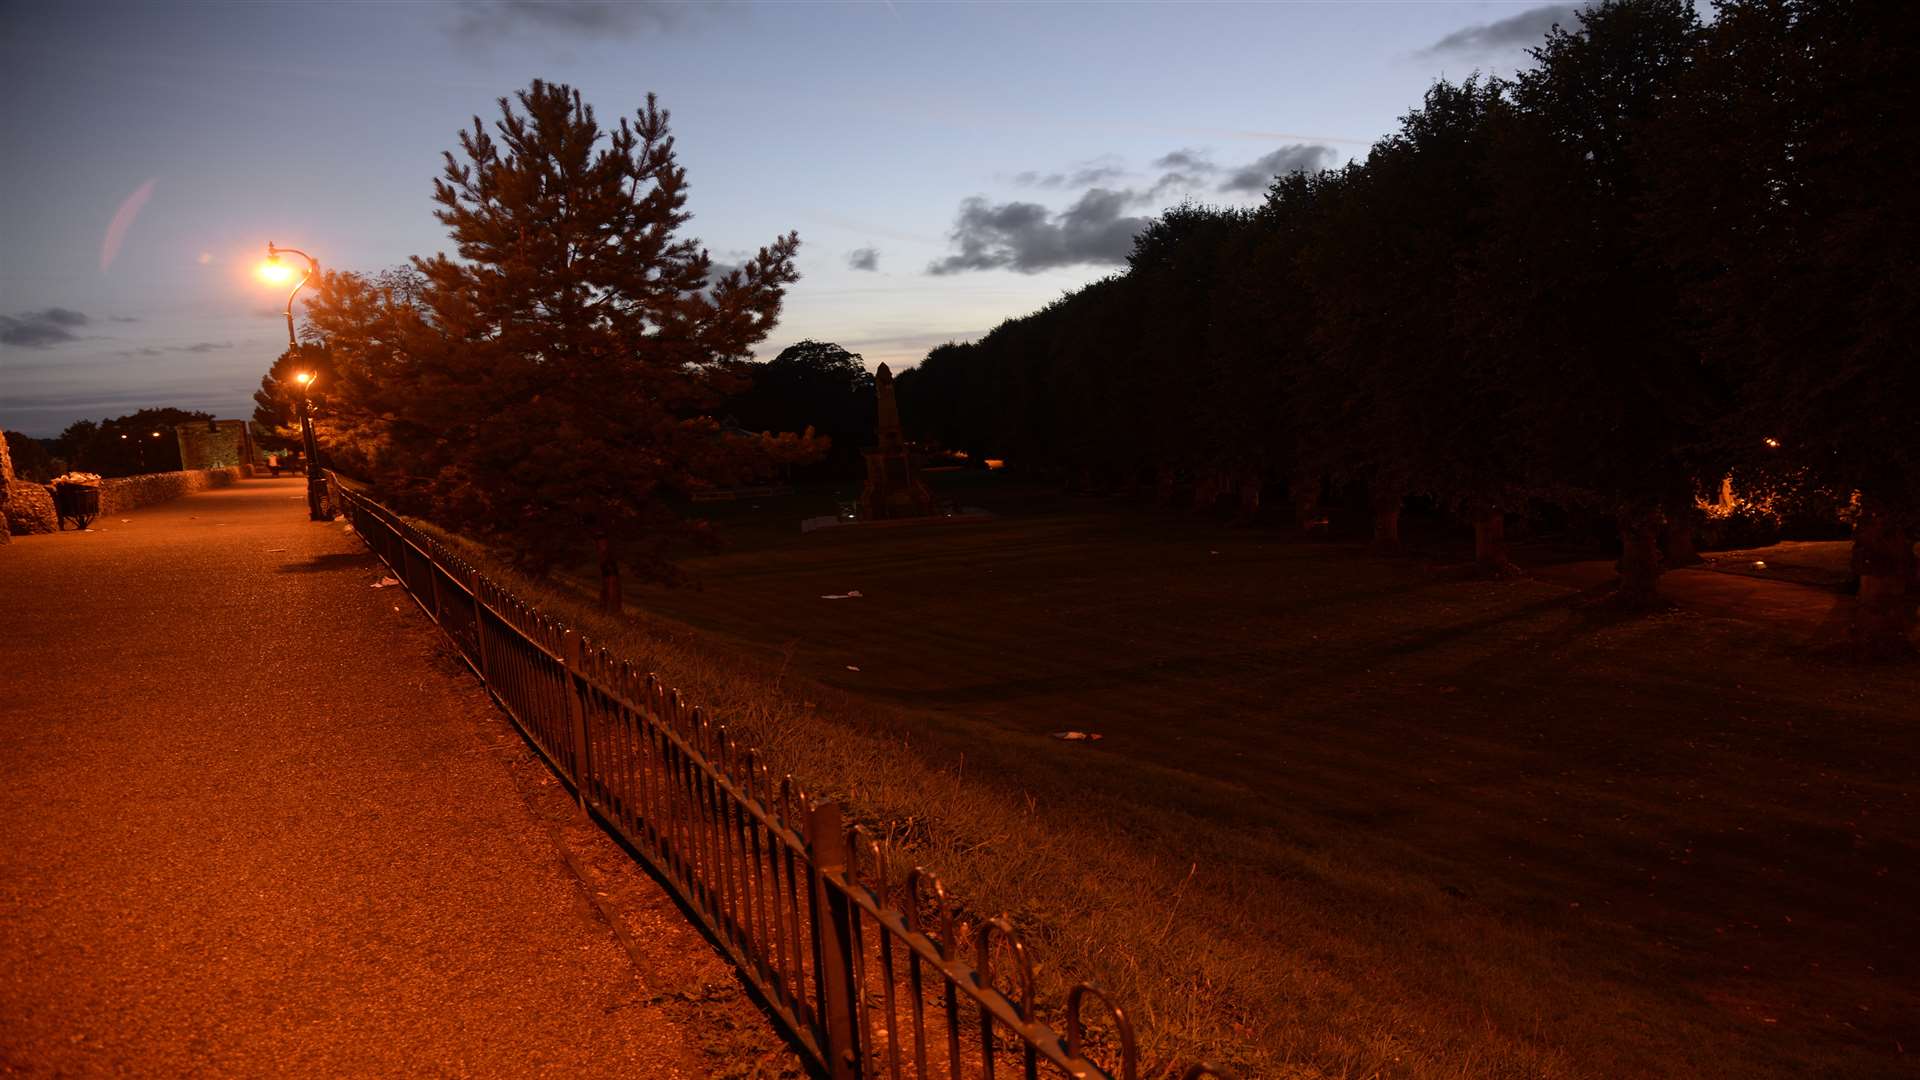 The Dane John Gardens in Canterbury has been plunged into darkness